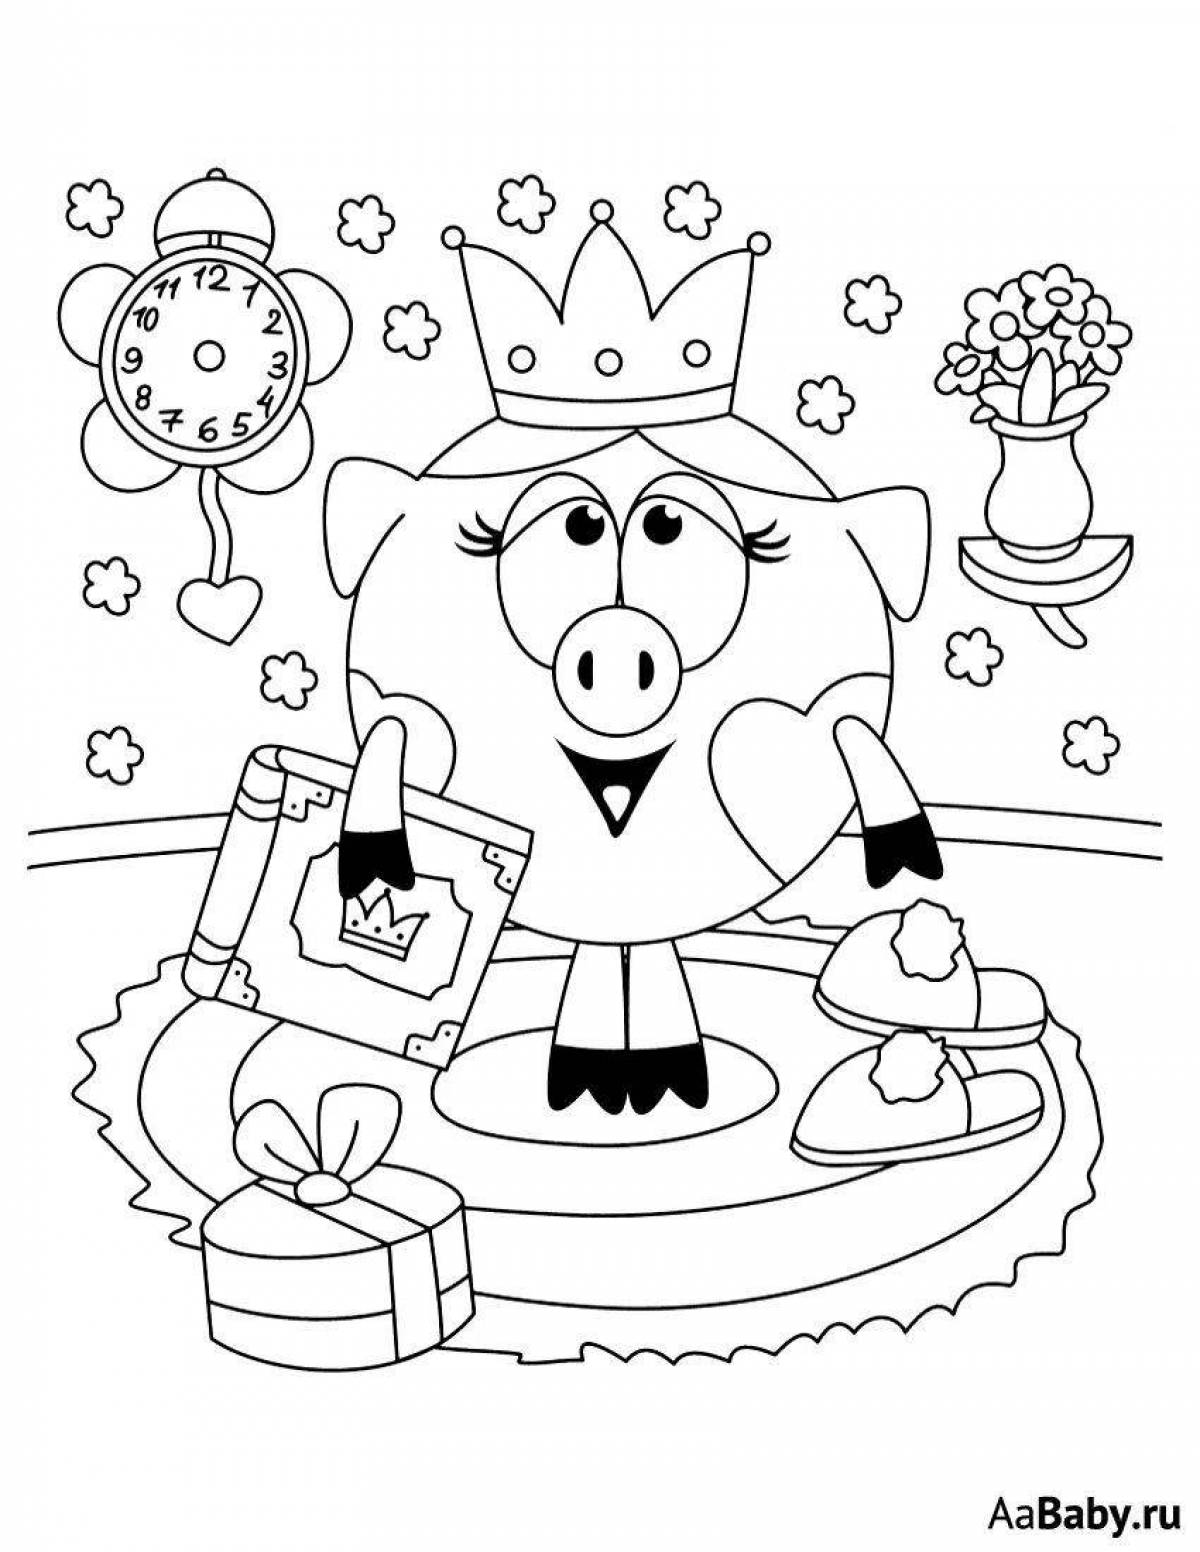 Colorful coloring book smart for 4-5 year olds